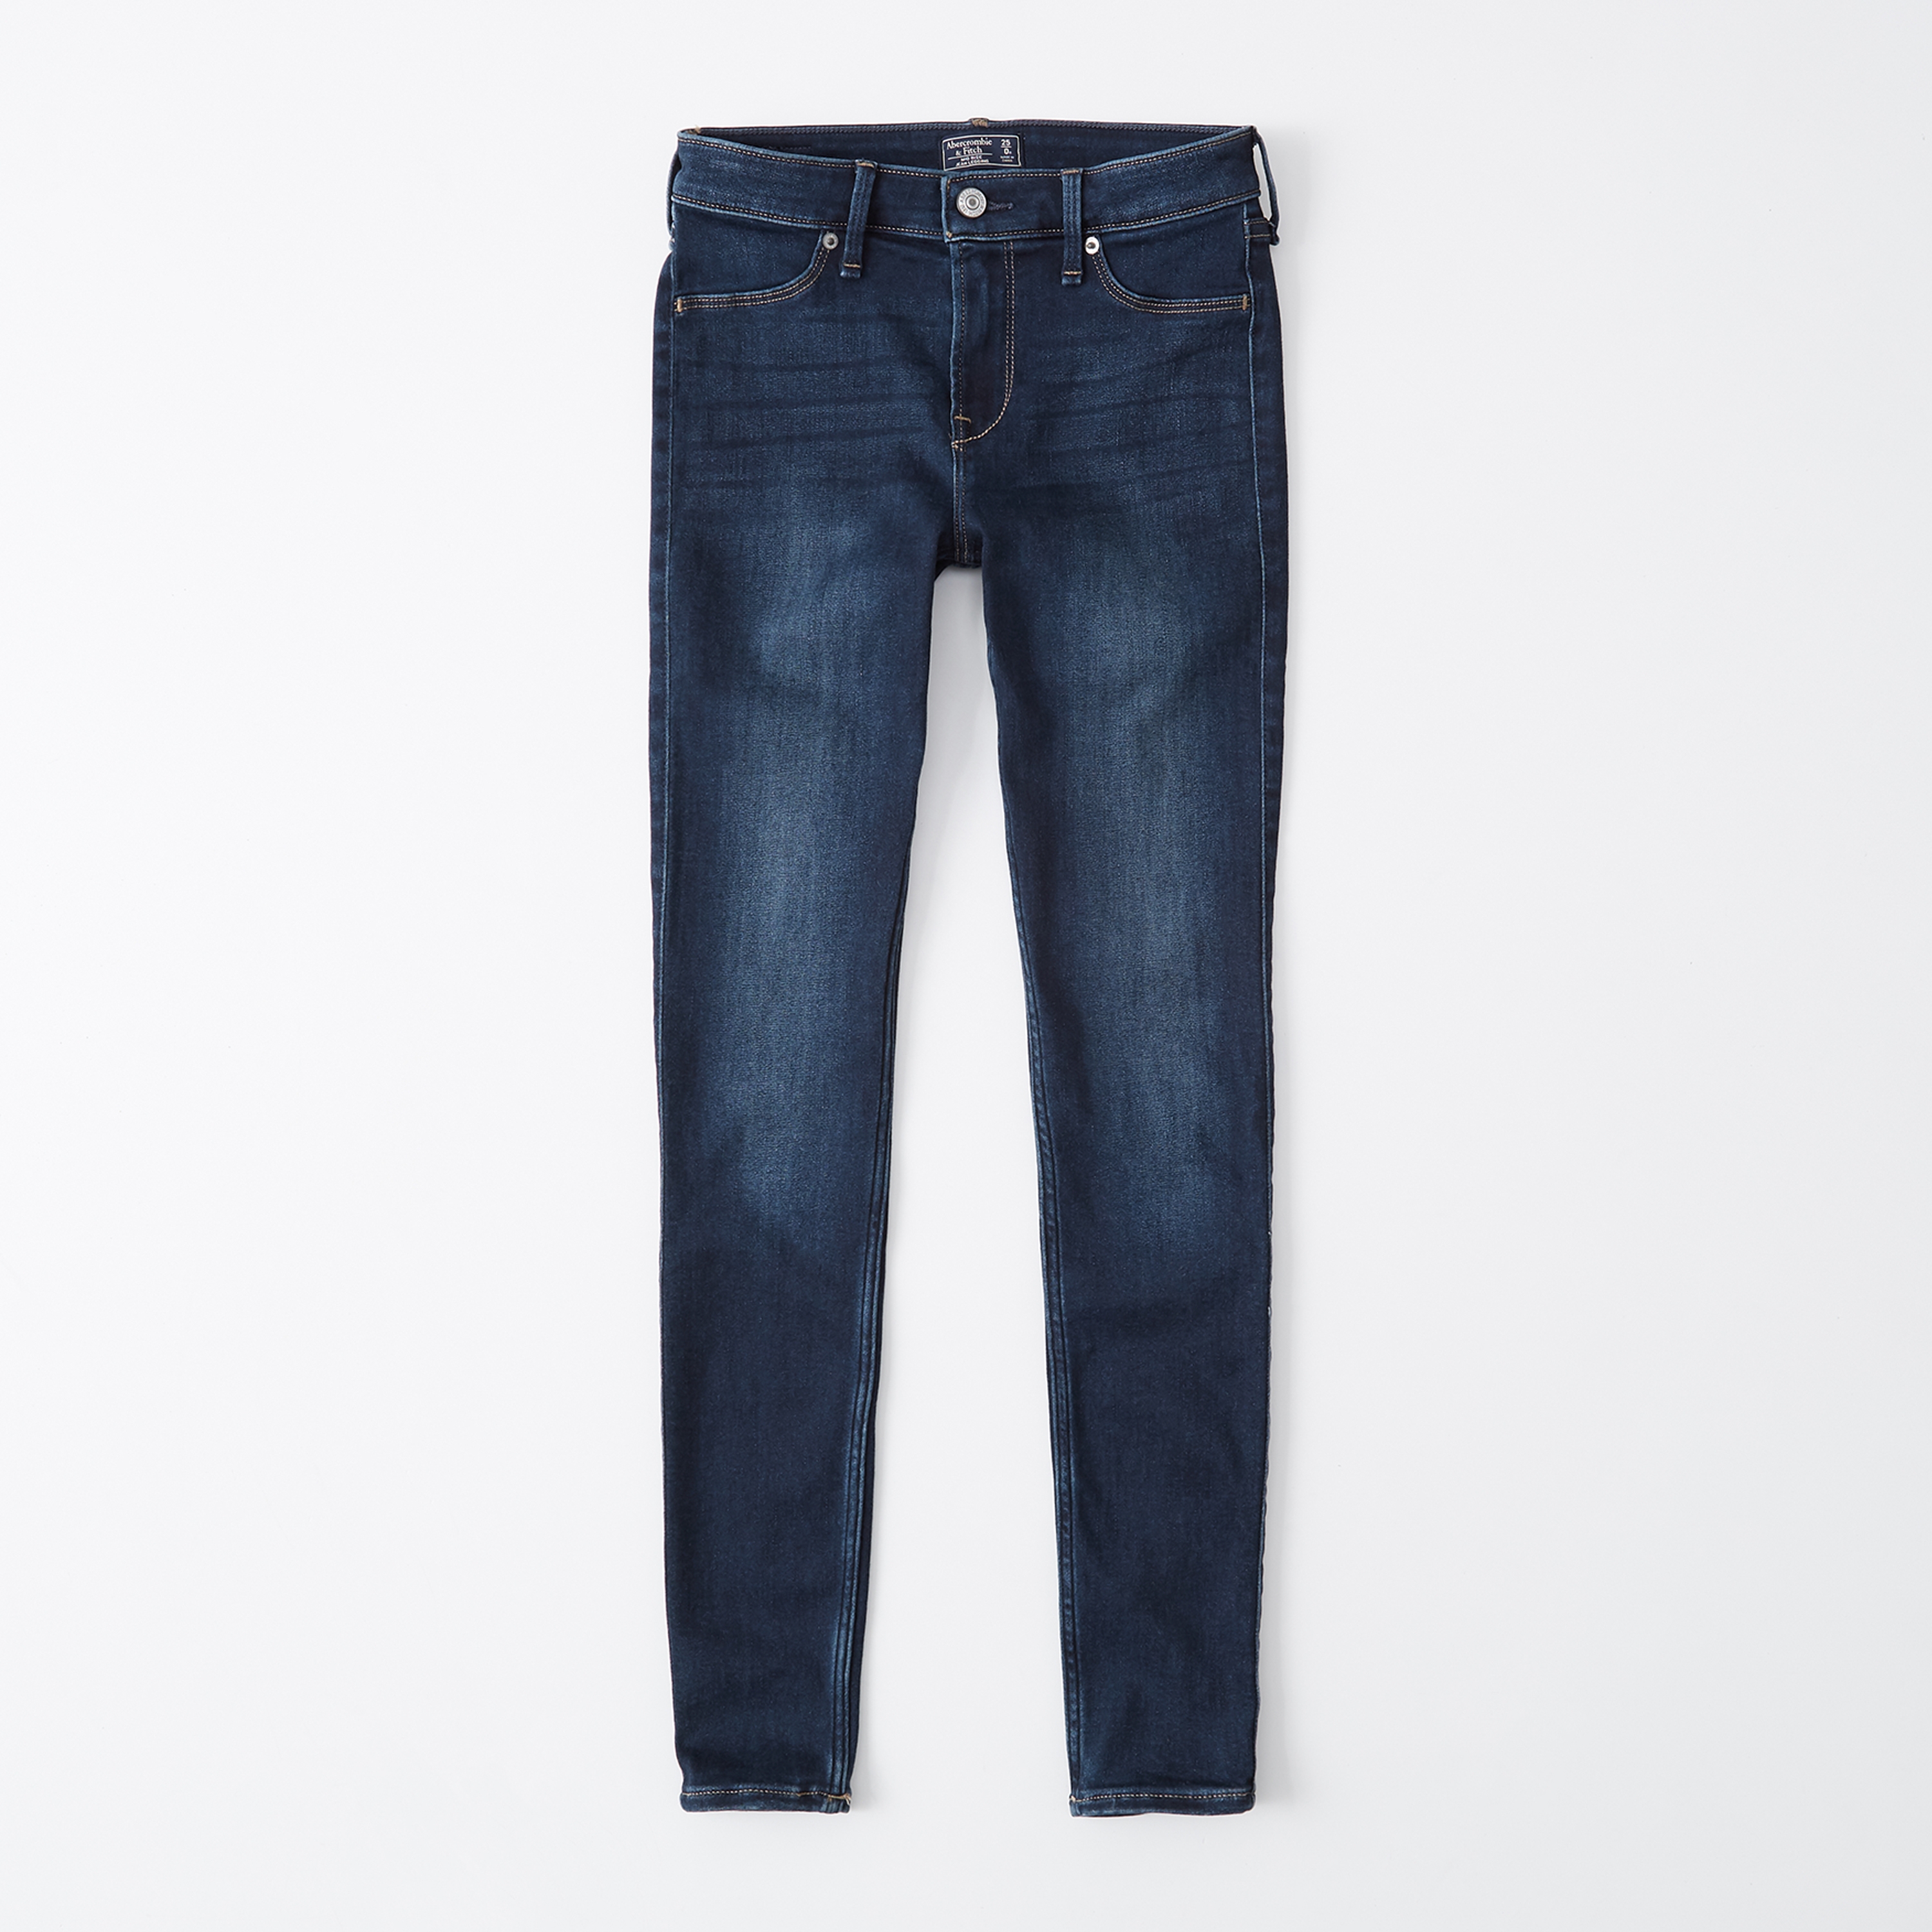 lee insulated jeans